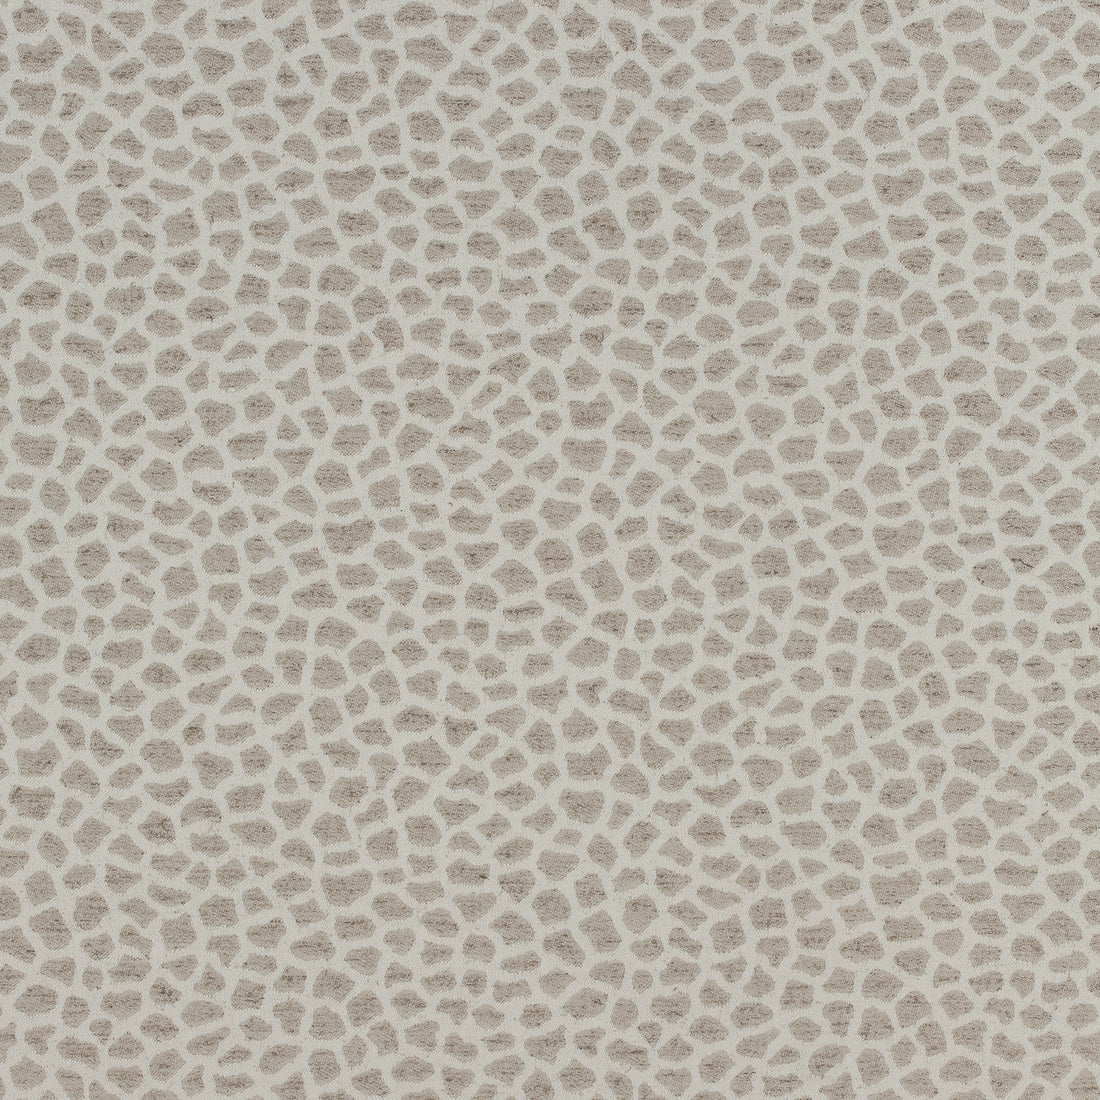 Masai fabric in taupe color - pattern number W80423 - by Thibaut in the Woven Resource Vol 10 Menagerie collection